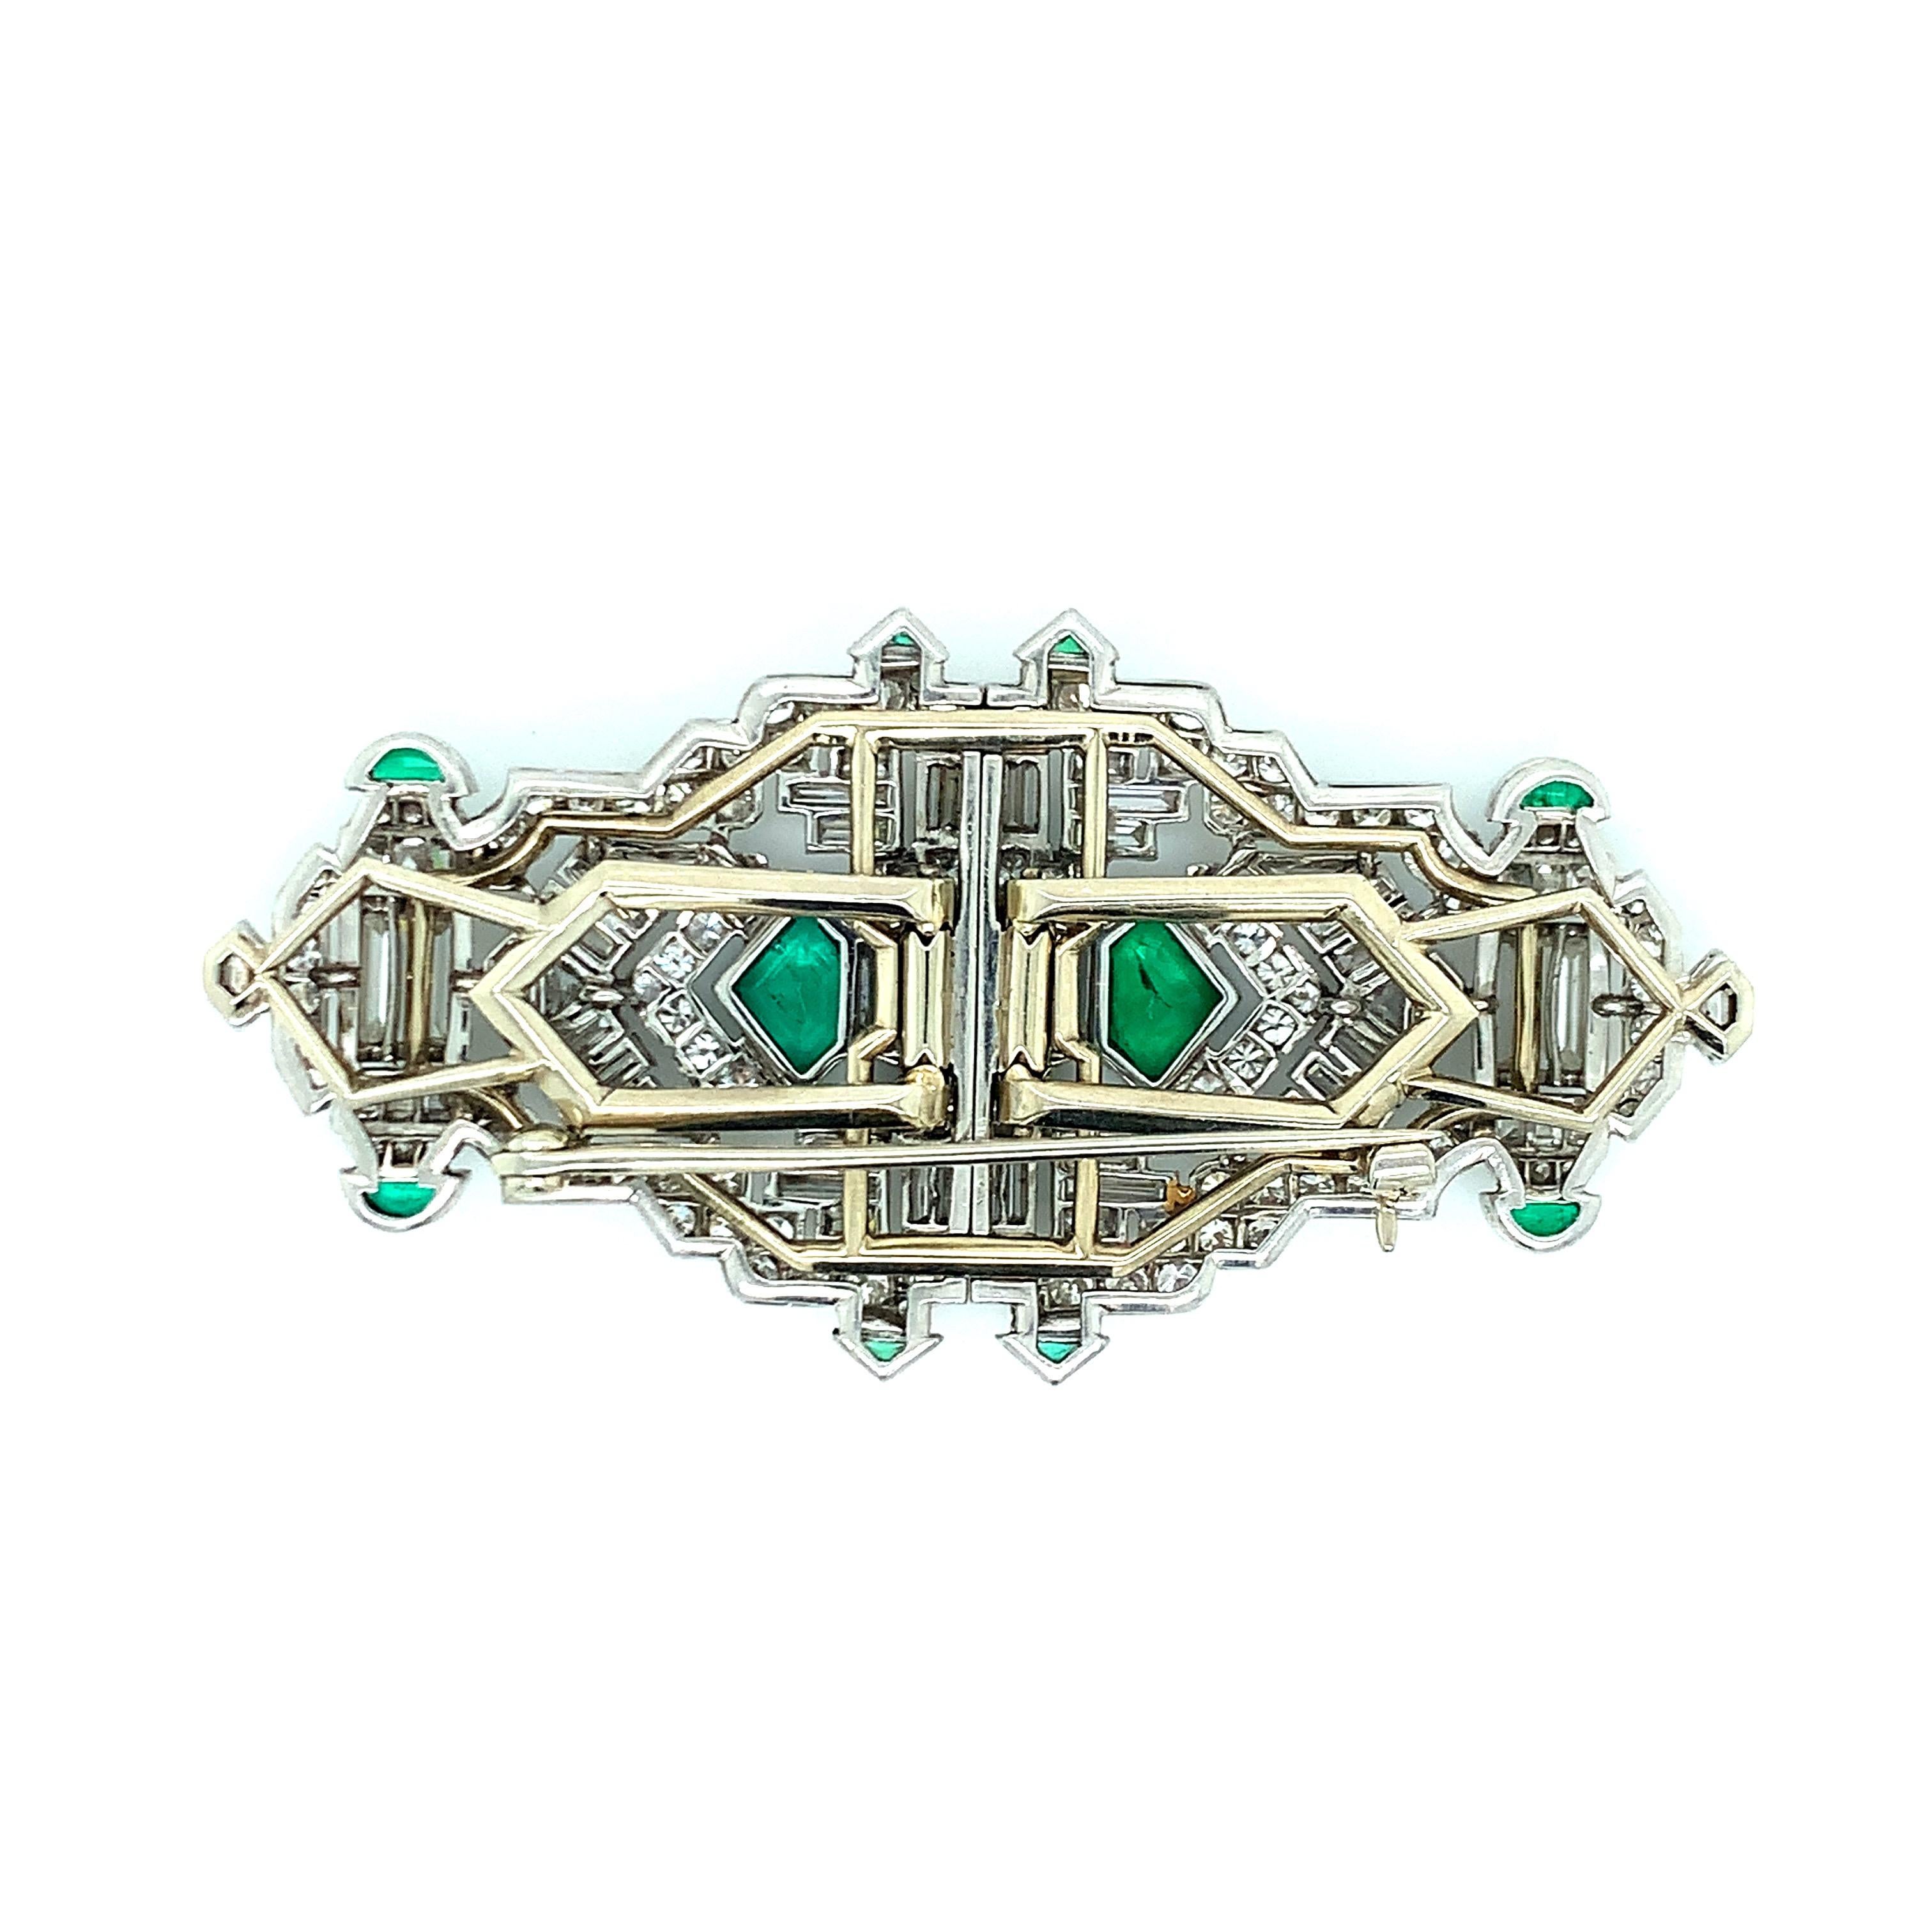 A well-made platinum Colombian emerald diamond double-clip brooch that consists of approximately 9 carats of diamonds and approximately 2.5 carats of emeralds. Comes with an AGL emerald report. 